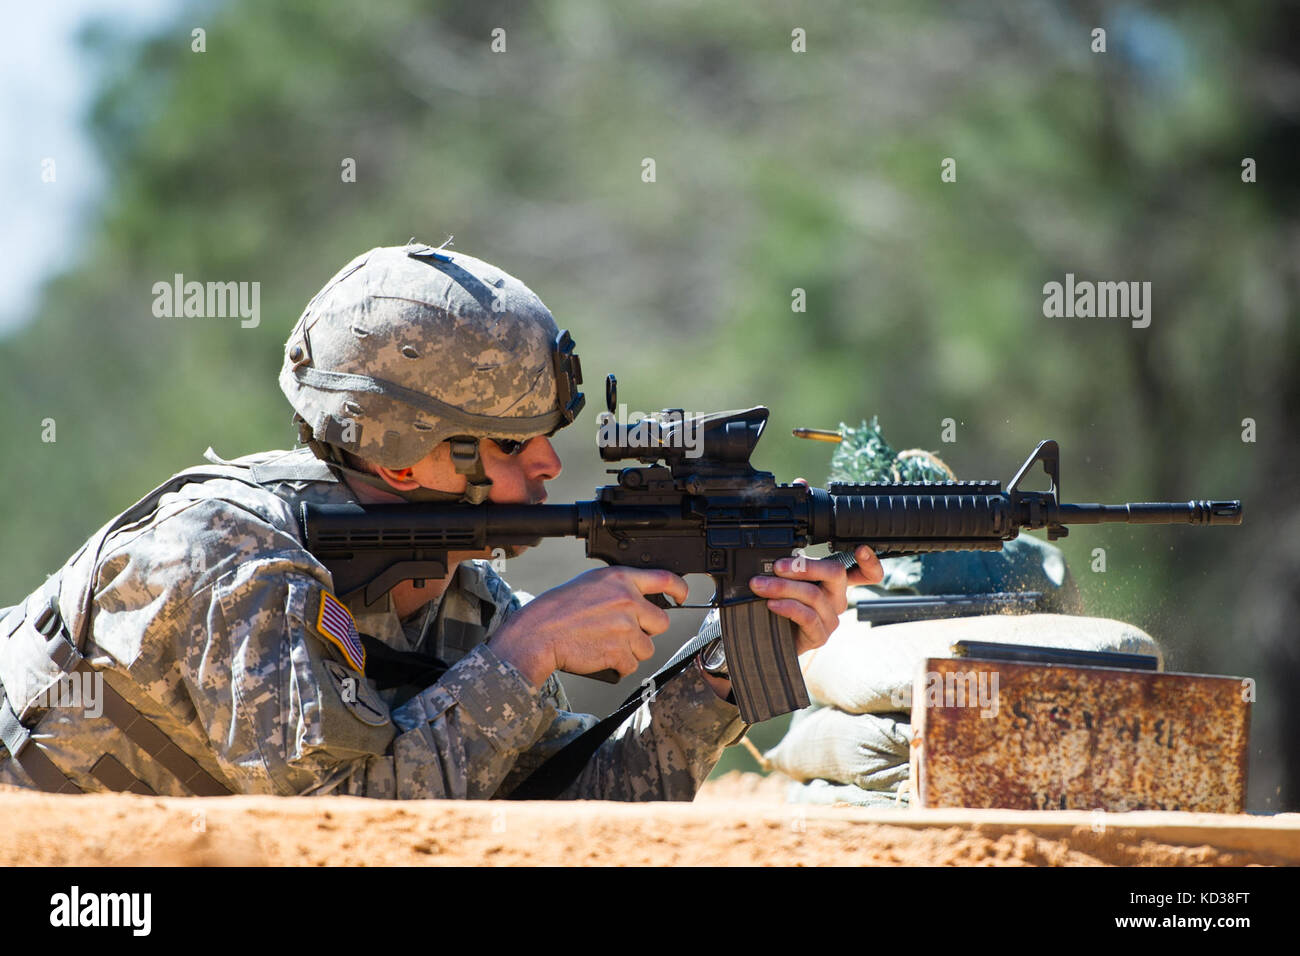 U.S. Army Sgt. Christopher Lee an automated logistic specialist assigned to the HHC, 4-118th Combined Arms Battalion, 218th Maneuver Enhancement Brigade, South Carolina Army National Guard, fires his M4 carbine at the qualification range on Fort Jackson, S.C. Feb. 27, 2016. Soldiers are required to qualify on the M4 carbine yearly as part of their training as infantry Soldiers.  (U.S. Air National Guard photo by Tech. Sgt. Jorge Intriago) Stock Photo